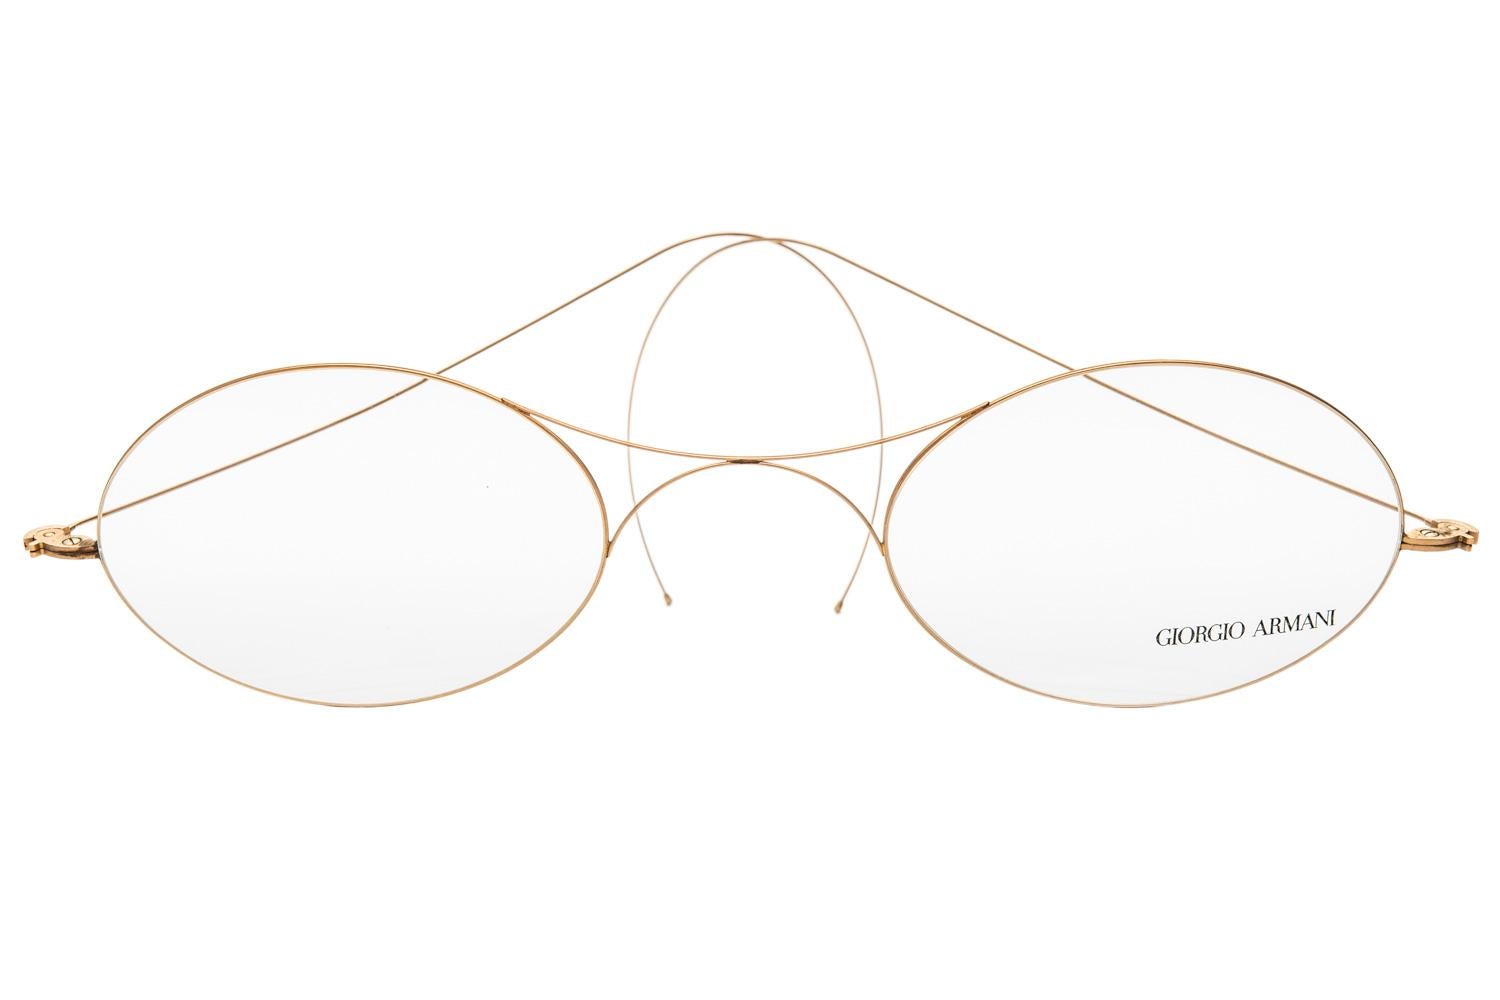 These fun and fabulous Classic vintage Armani frame glasses were probably made for promotional or store display purposes. The giant frame is in a gold colored metal while the lenses are acrylic and imprinted with Giorgio Armani in bold black